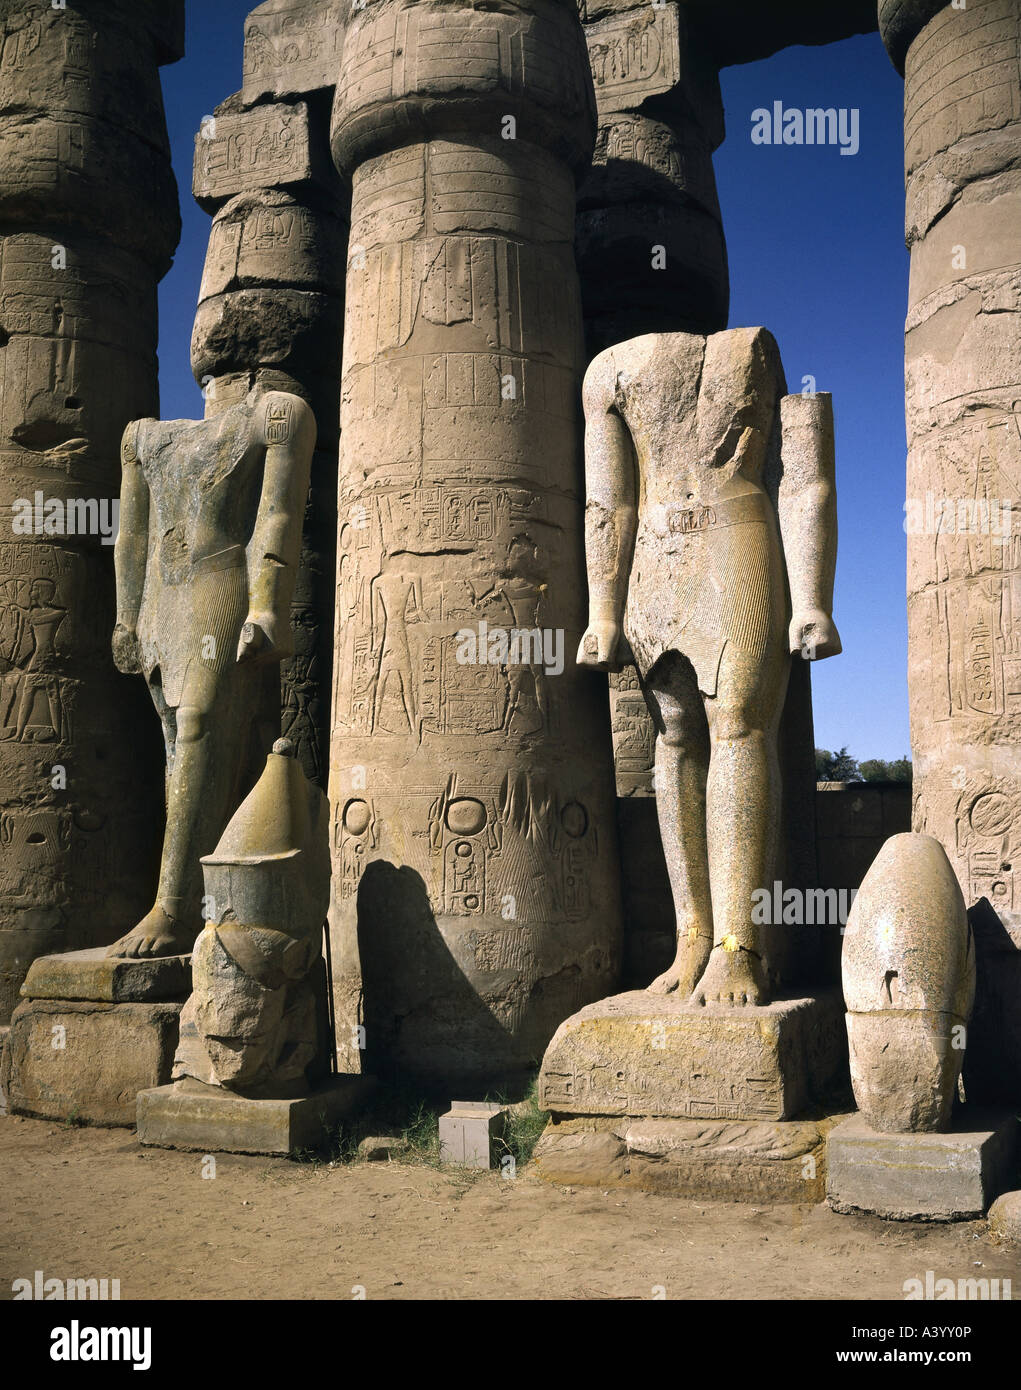 travel /geography, Egypt, Luxor, buildings, temple, Theban divine family Amun, Mut, Chons, exterior view, temple of Ramesses II, southern part, statues of pharaoh Amenhotep III, architect Amenhotep son of Hapu, 1402 - 1364 B.C., extensions under Ramesses II, 1303 - 1236 B.C., historic, historical, Africa, architecture, temples, ancient world, New Kingdom, 18th / 19th dynasty, 15th - 13th century B.C., column, columns, statue, sculpture, sculptures, ancient world, Stock Photo